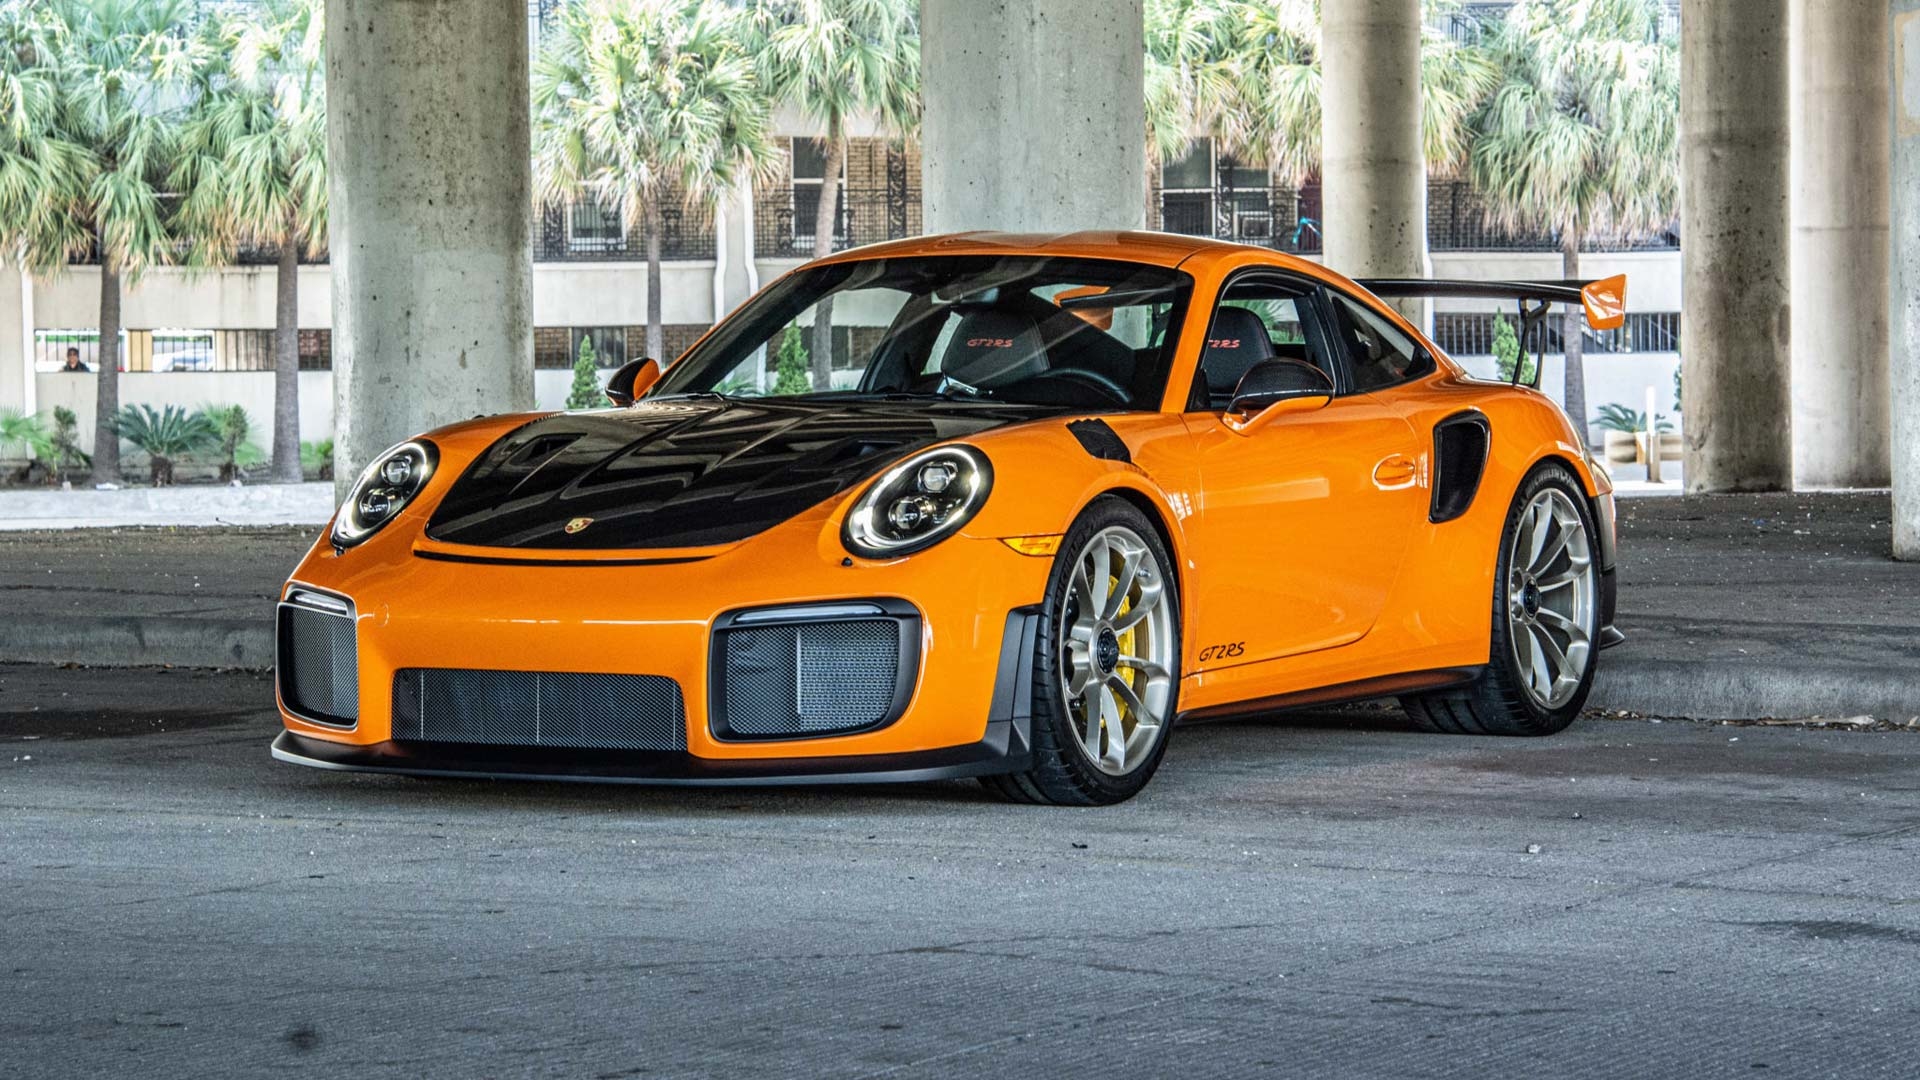 Live your tangerine dreams with this extreme Porsche 911